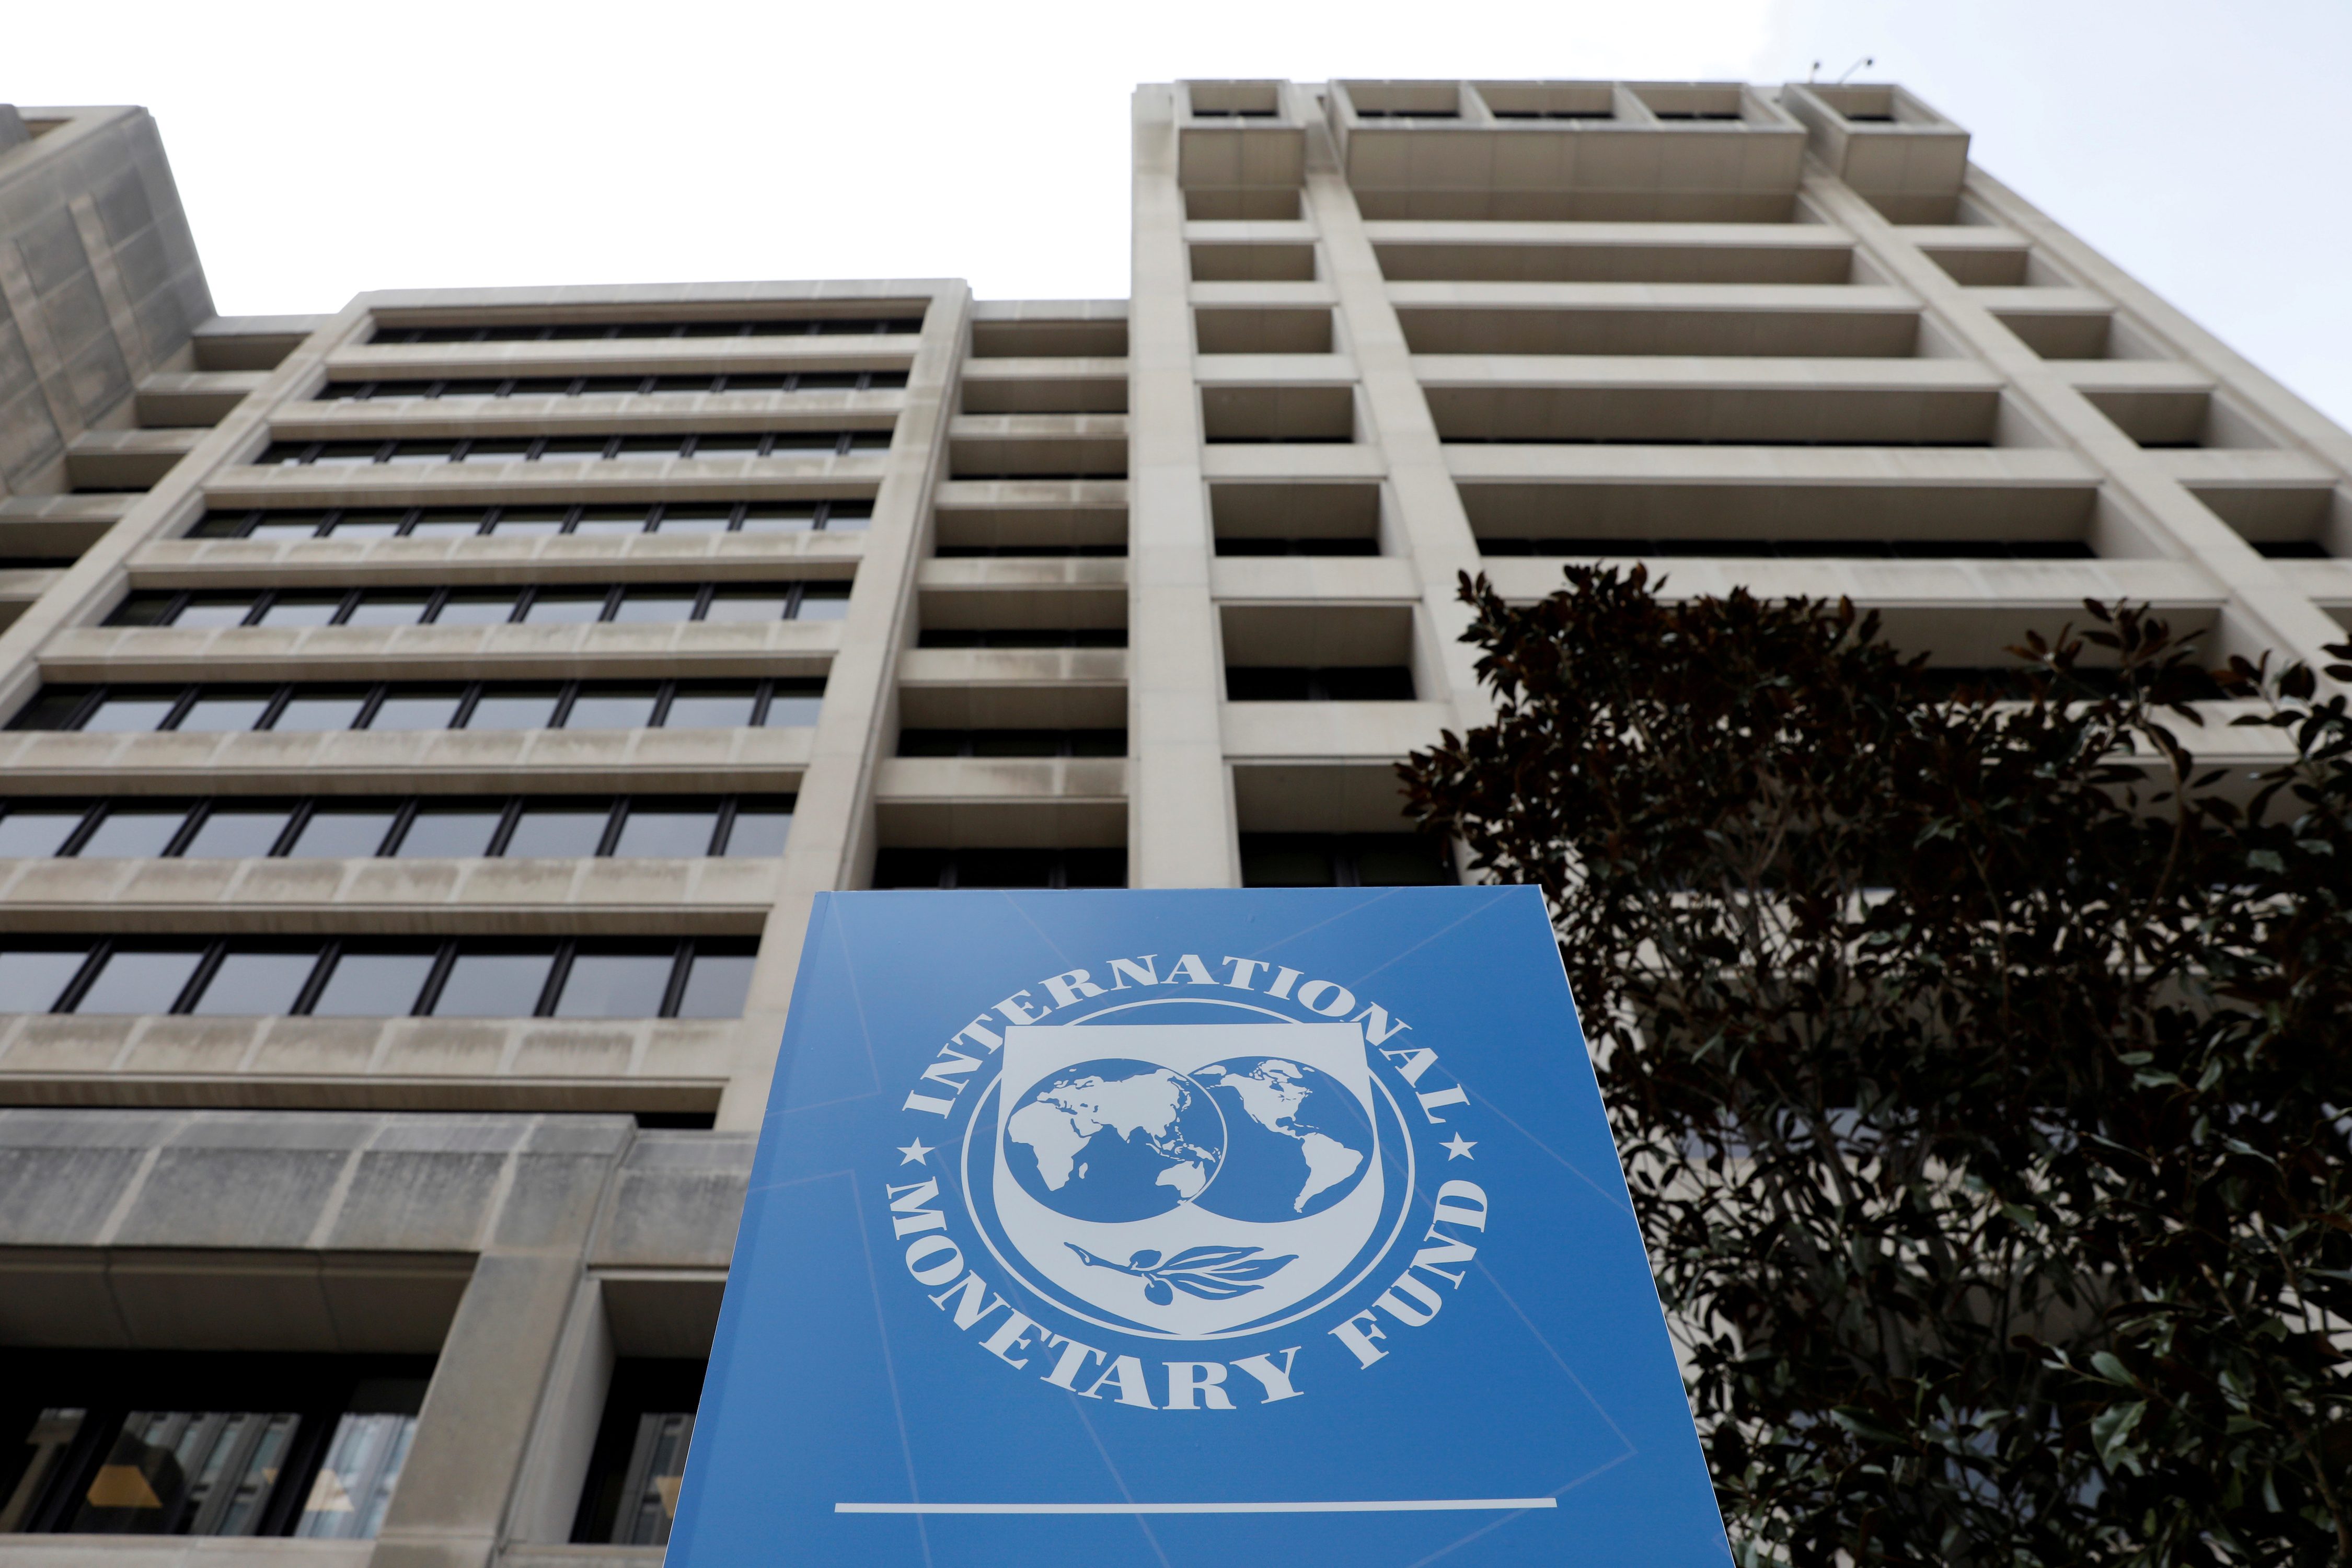 IMF board to meet again on Georgieva review on October 8 – source